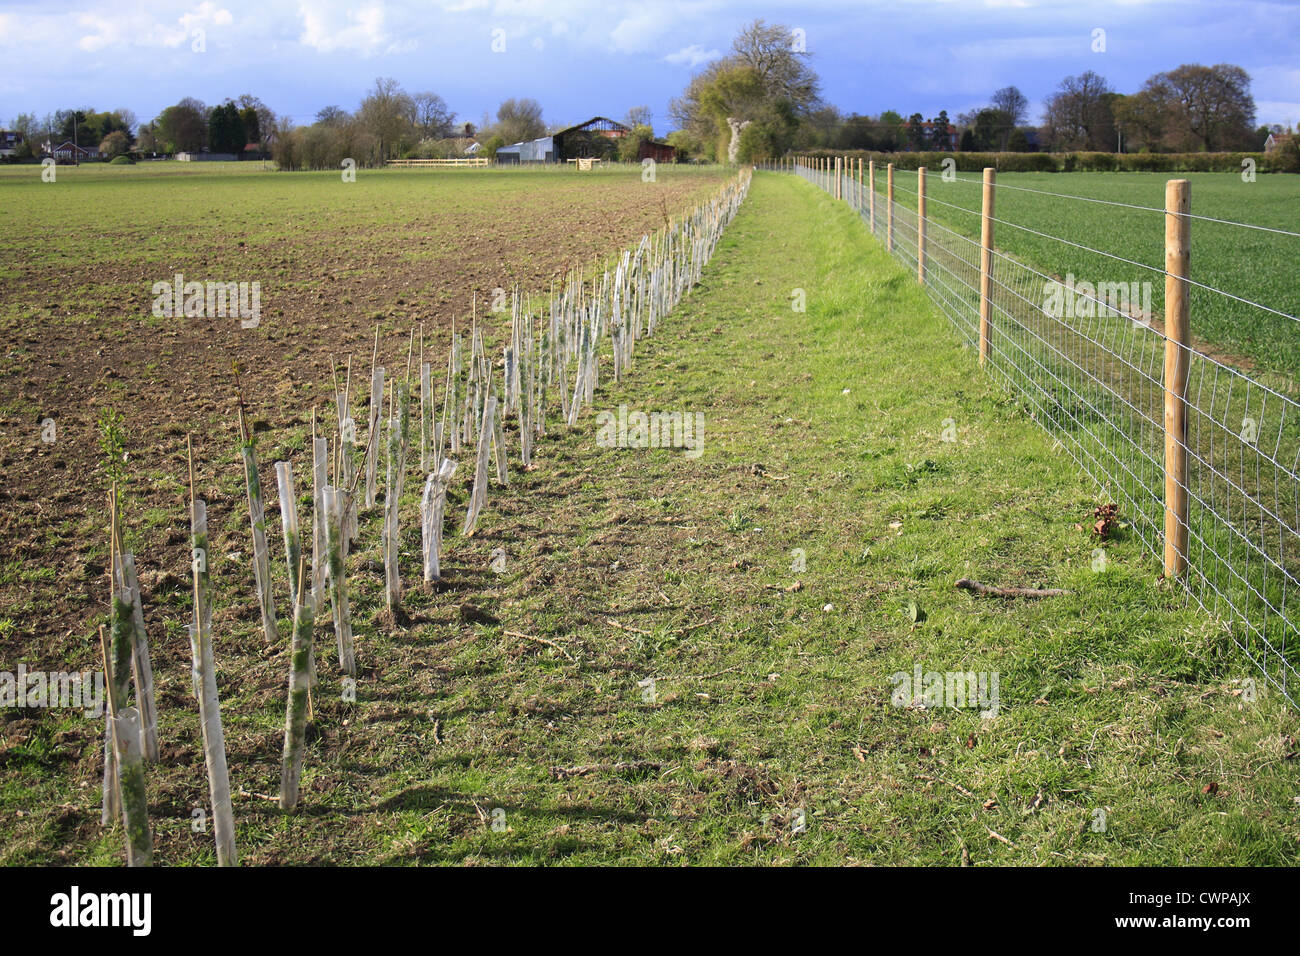 Newly planted tree saplings protected with plastic sleeves and wire fencing at edge of field, Bacton, Suffolk, England, april Stock Photo